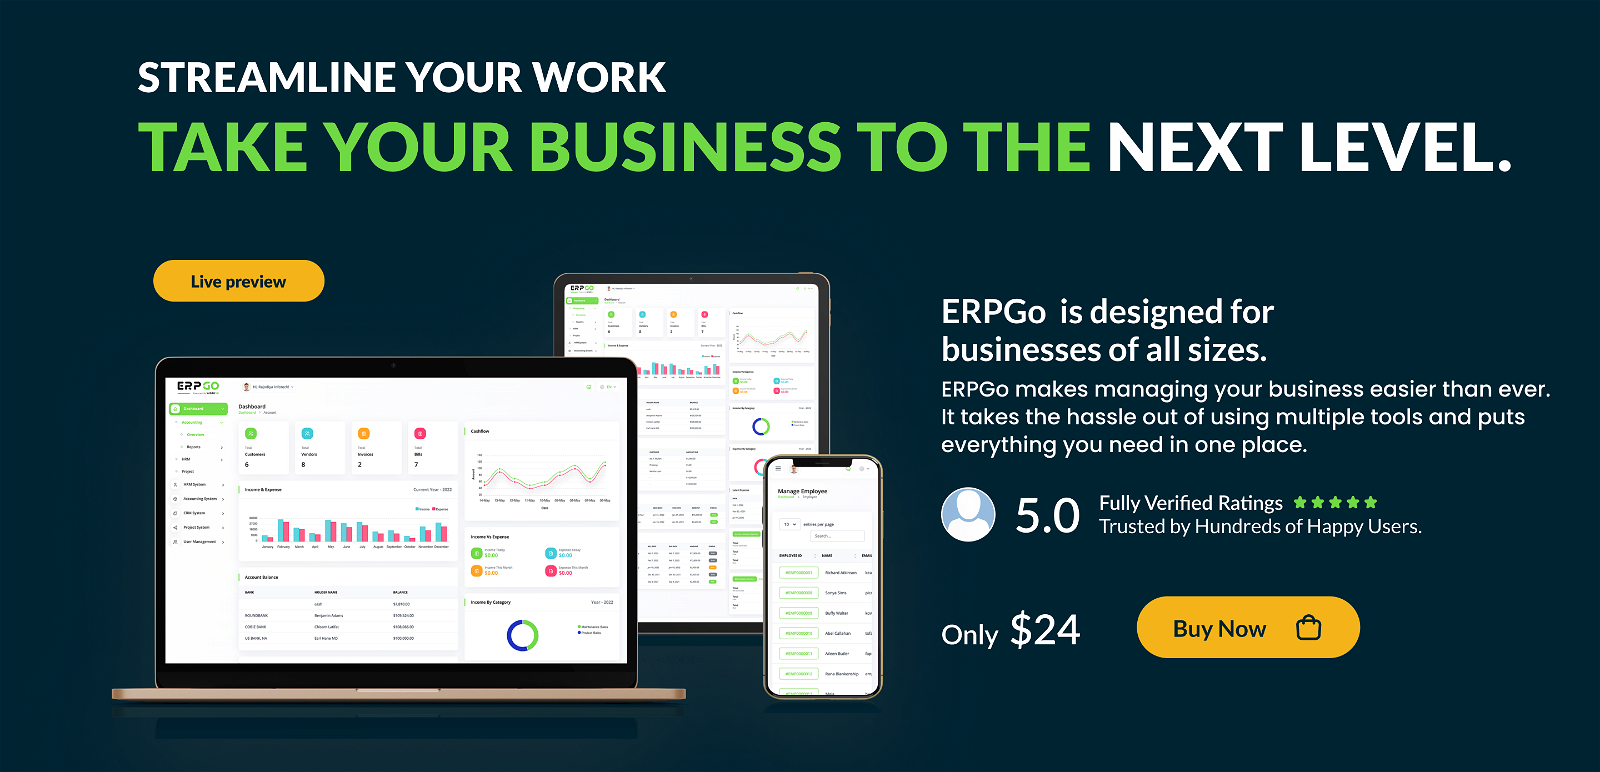 ERPGo SaaS - All In One Business ERP With Project, Account, HRM & CRM - 4